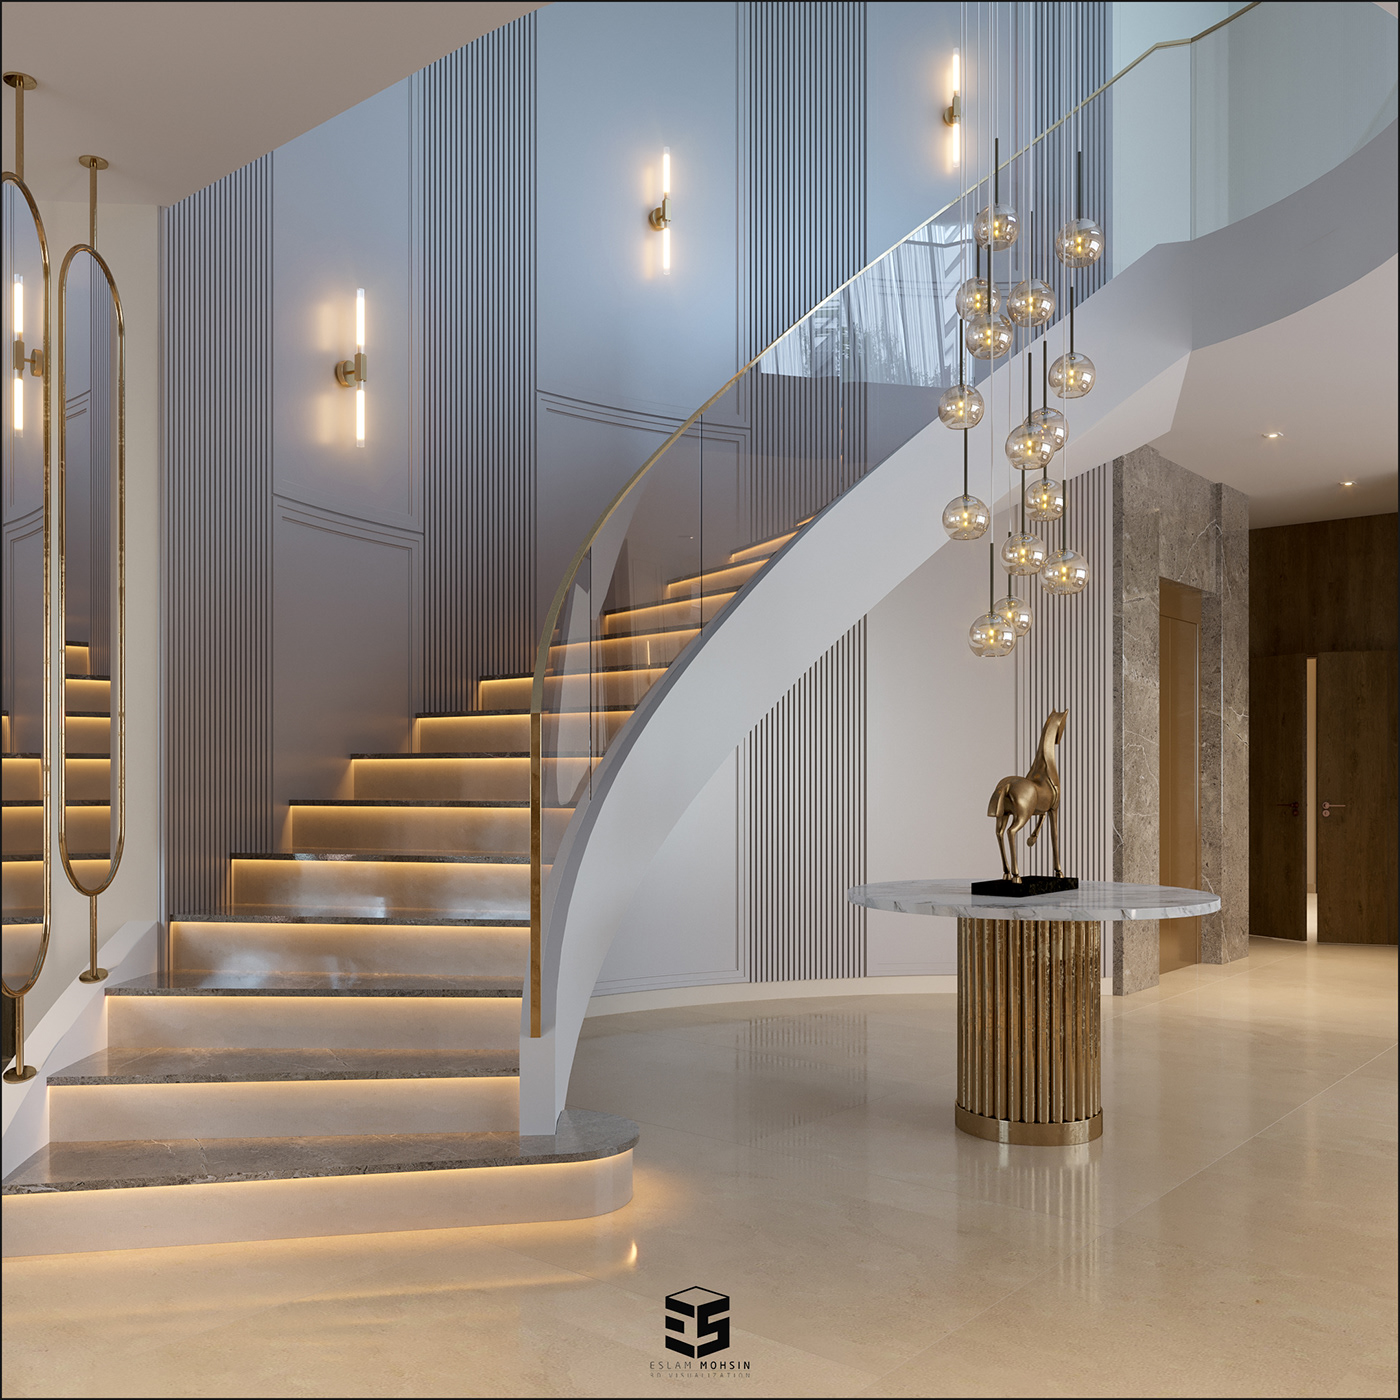 architecture stairs Staircase living room 3D design marketing   Brand Design designer visual identity